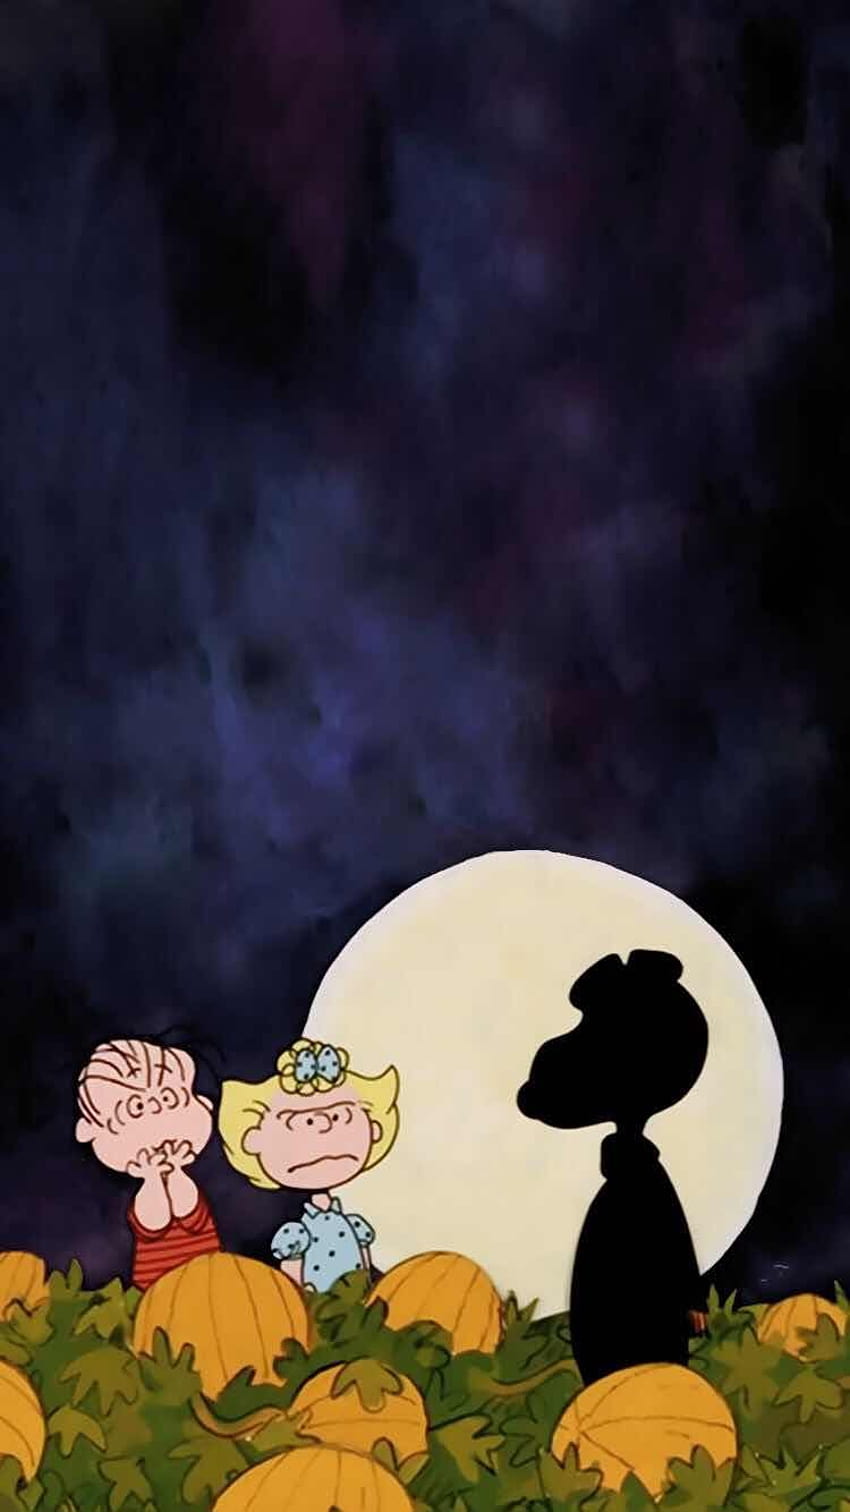 iPhone and Android : Snoopy/Peanuts Halloween for iPhone and Android, the peanut halloween HD phone wallpaper